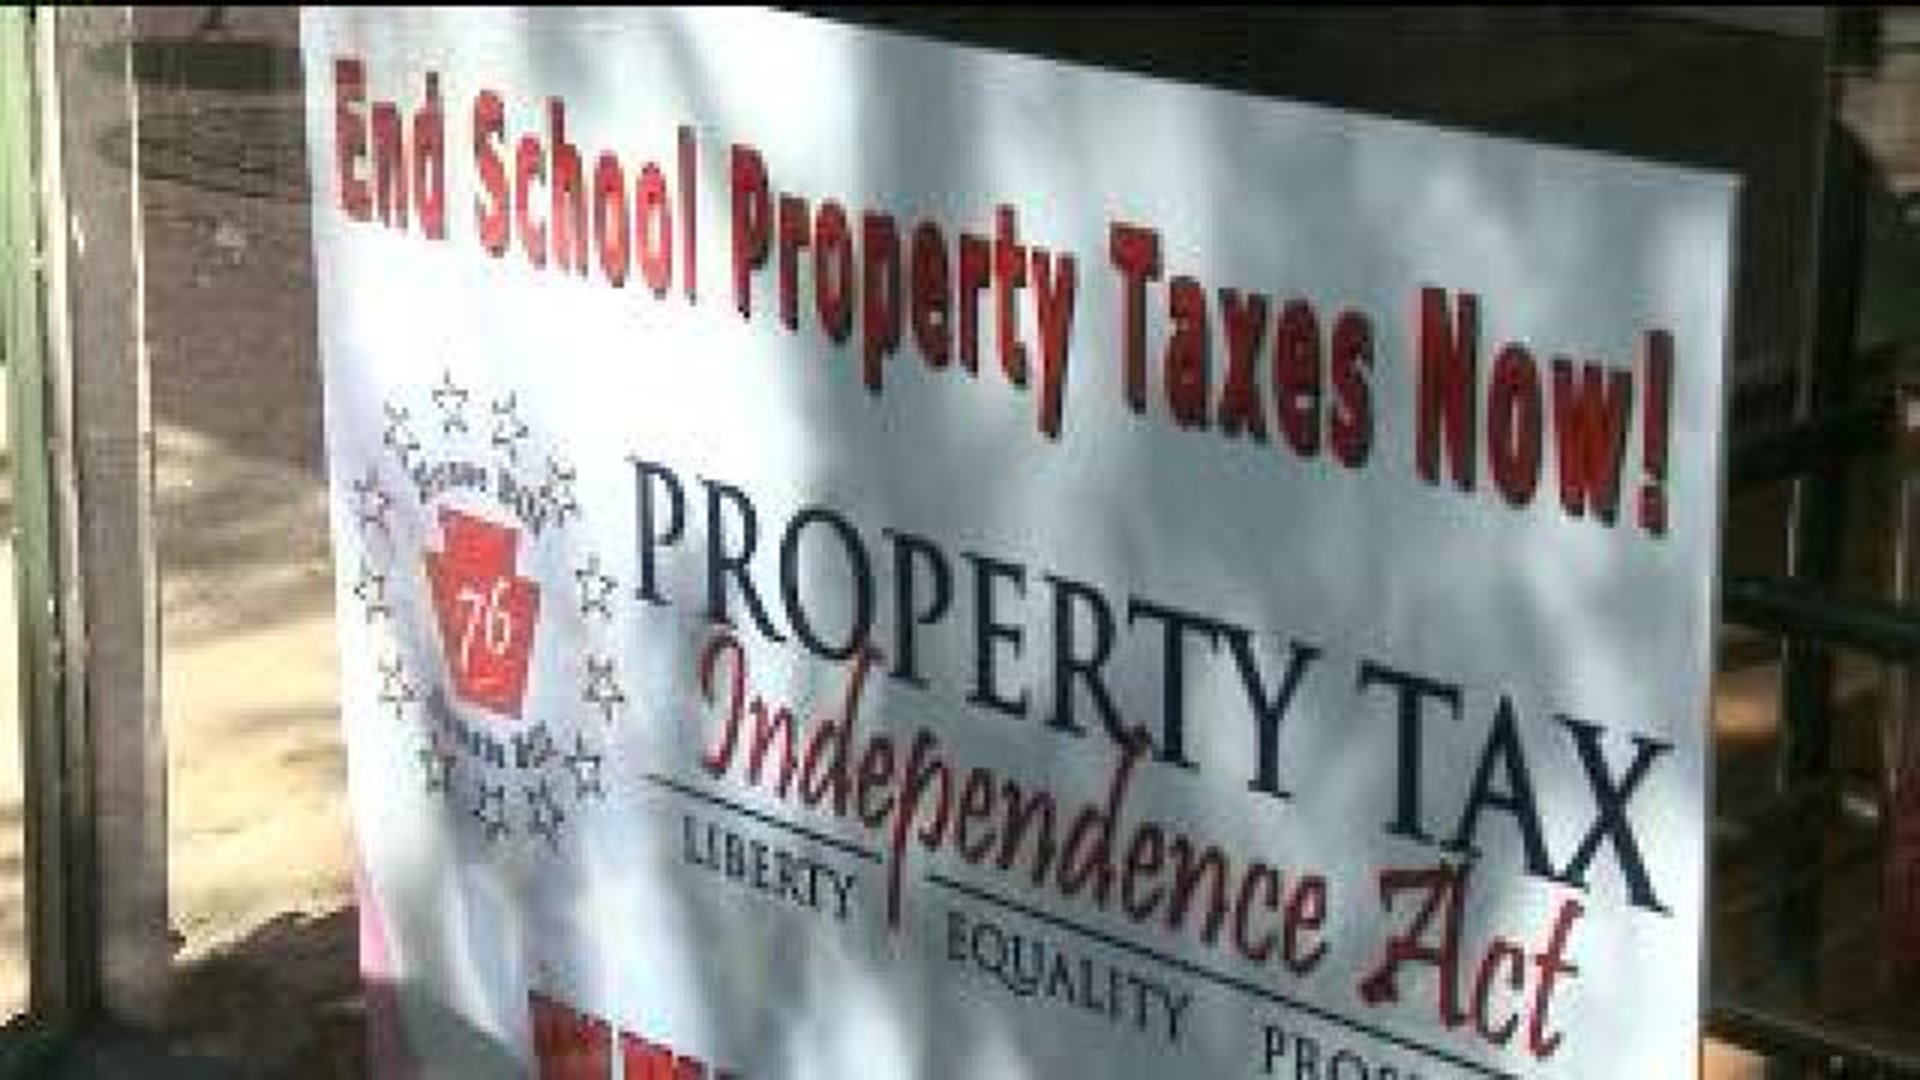 Voters Rally to End School Property Tax